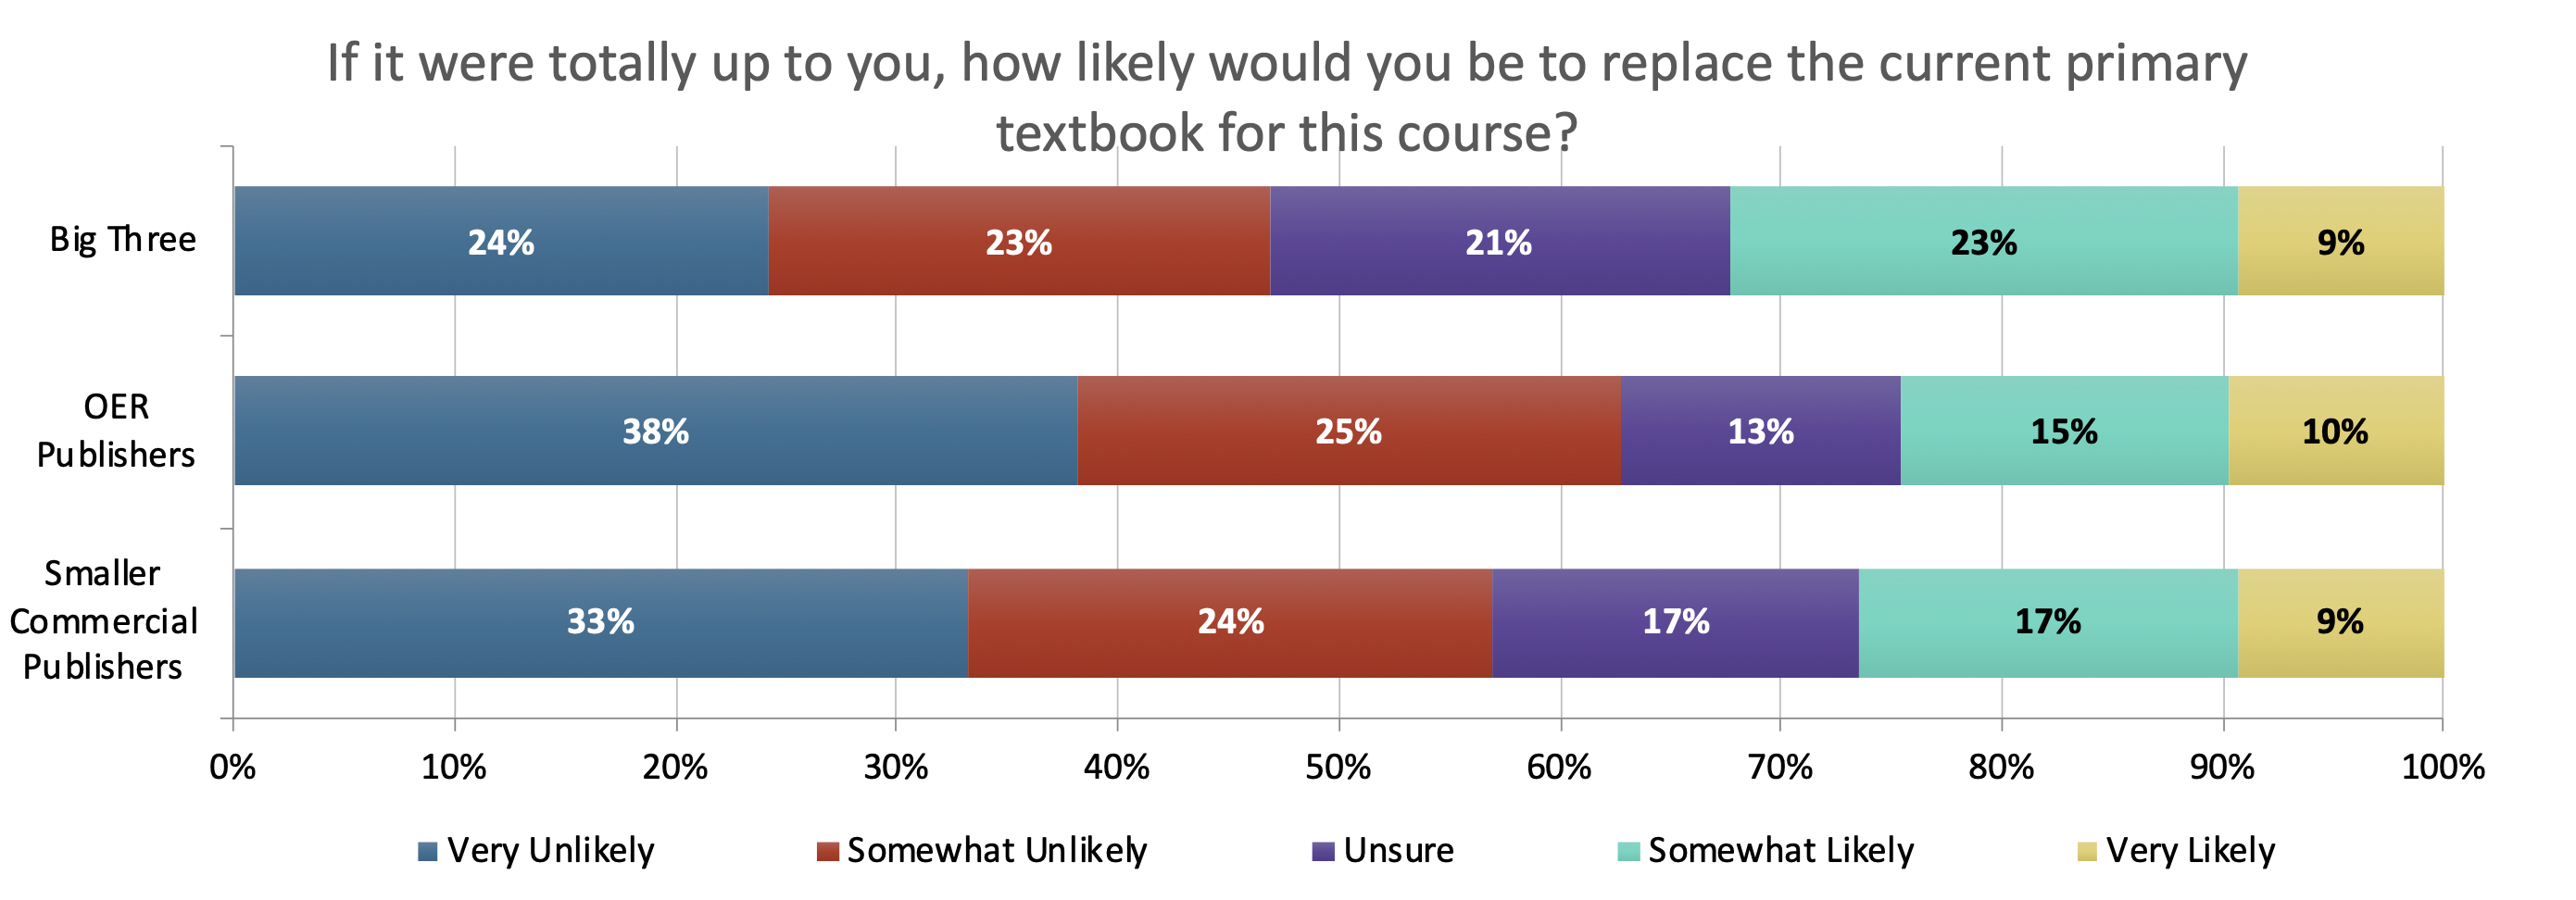 If it were totally up to you, how likely would you be to replace the current primary textbook for this course?